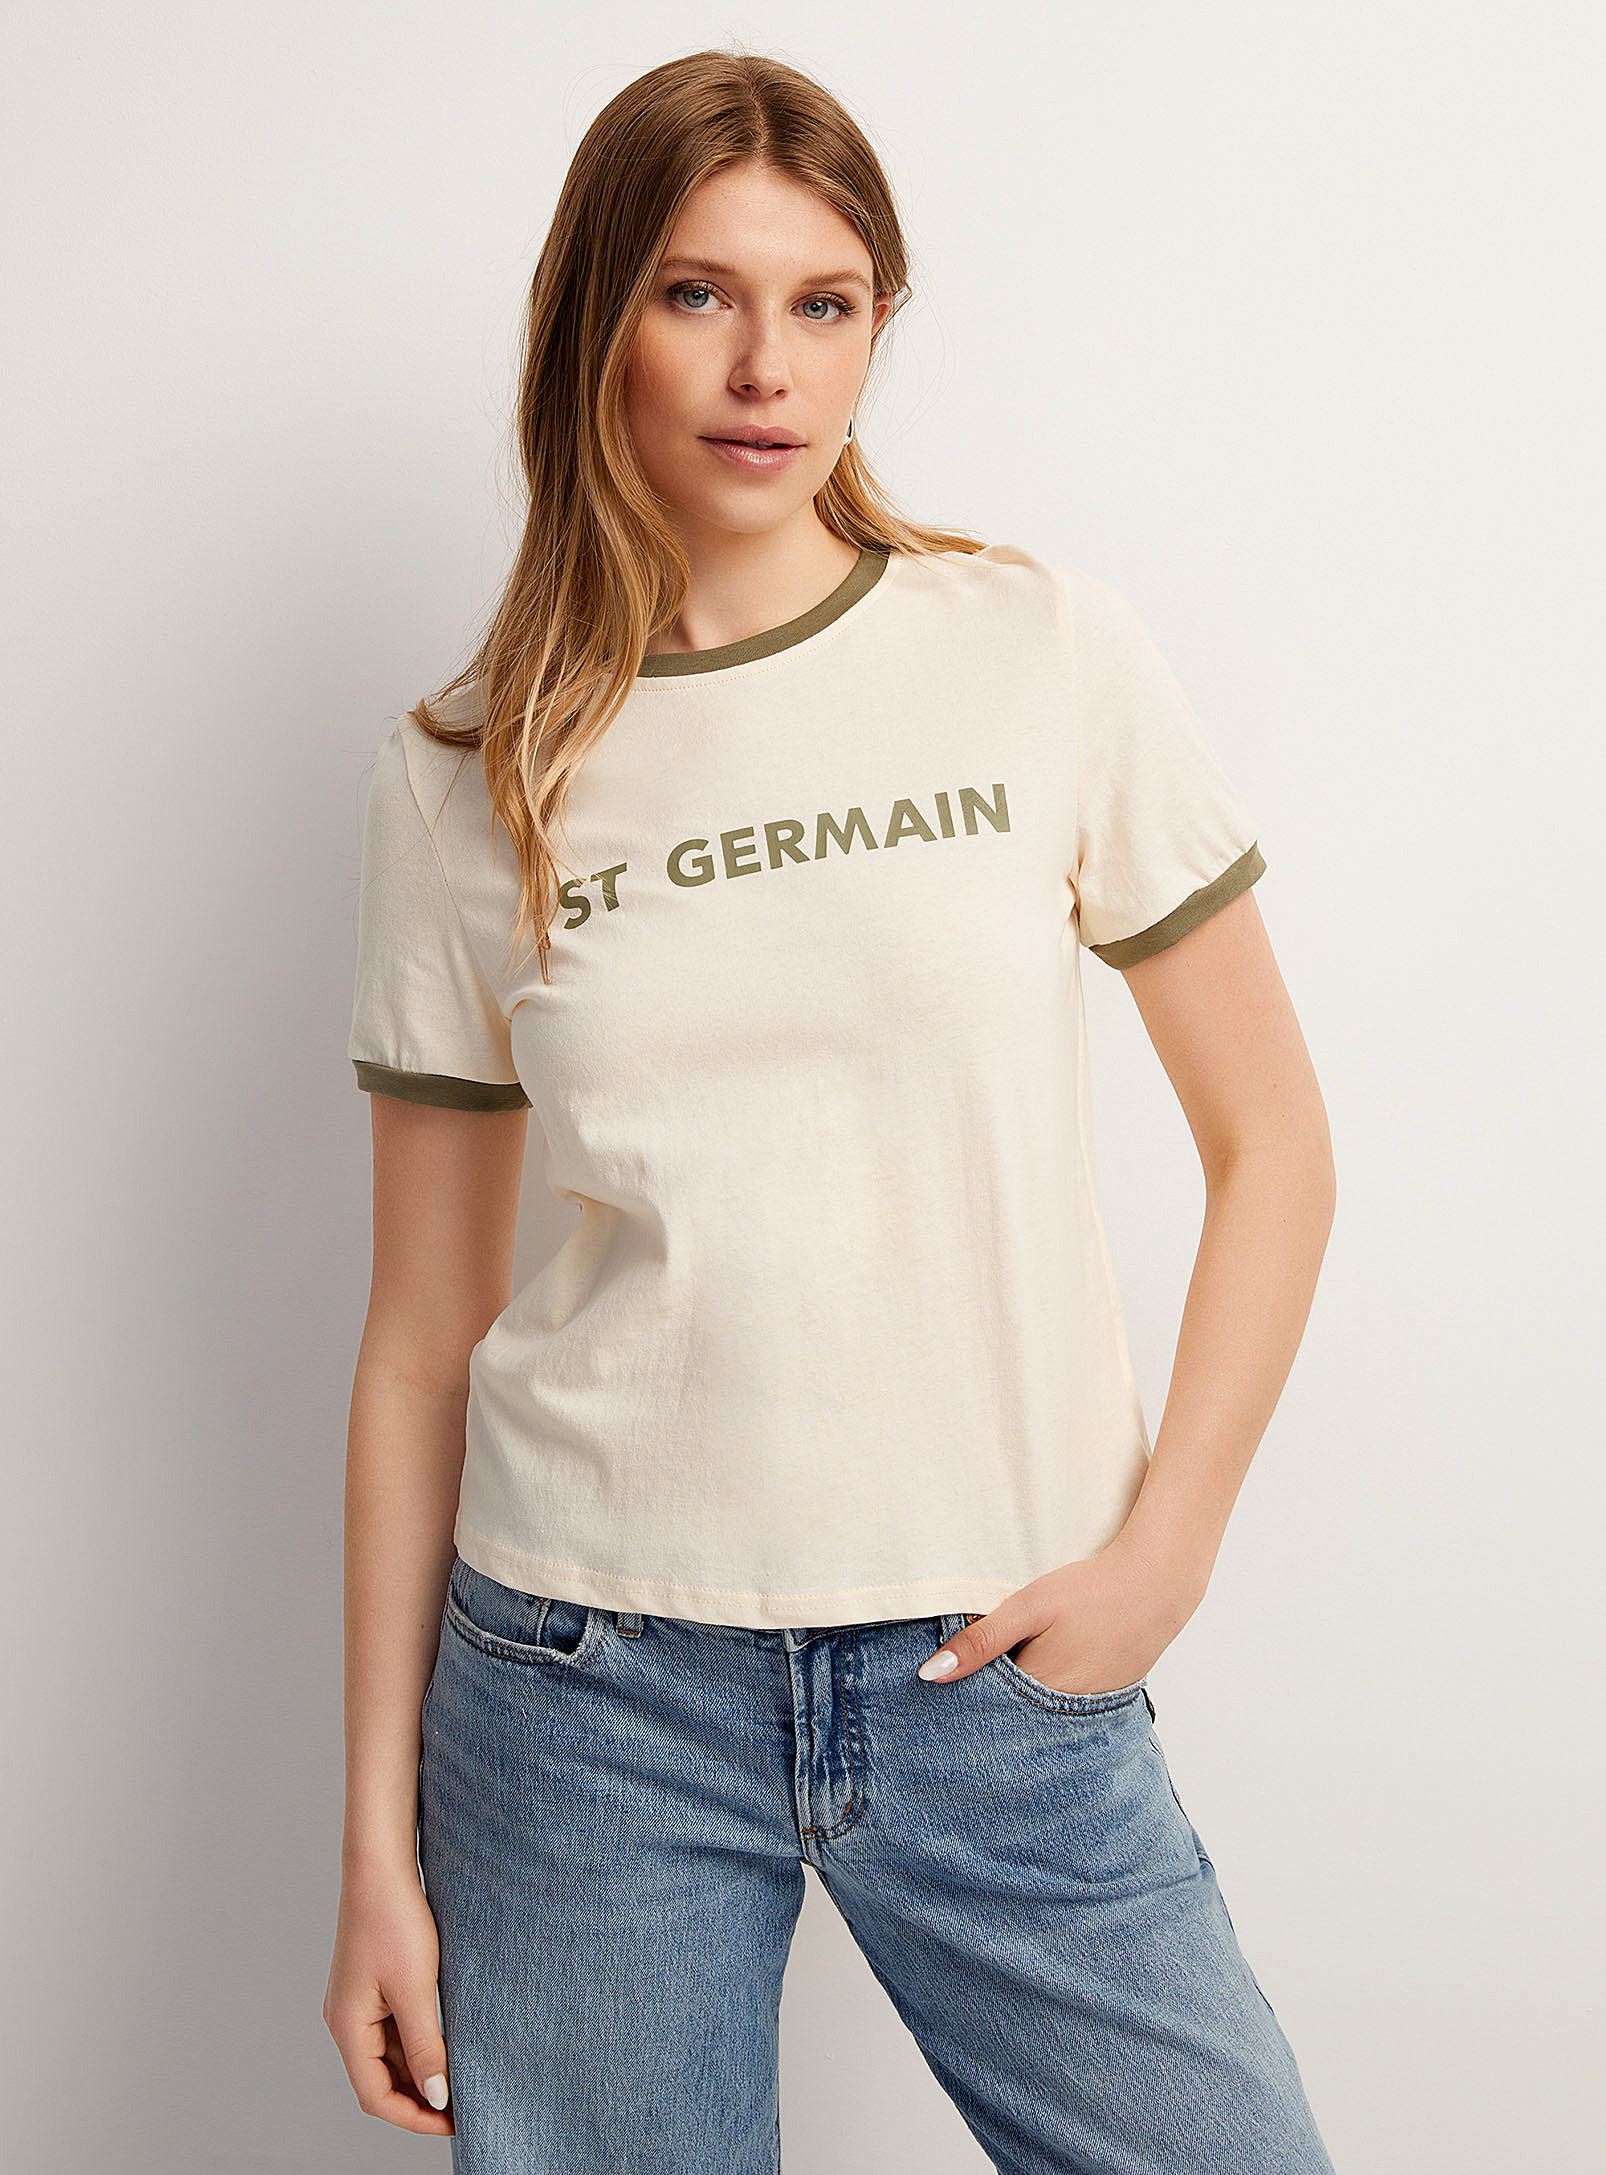 Icone Parisian District T-shirt In Off White